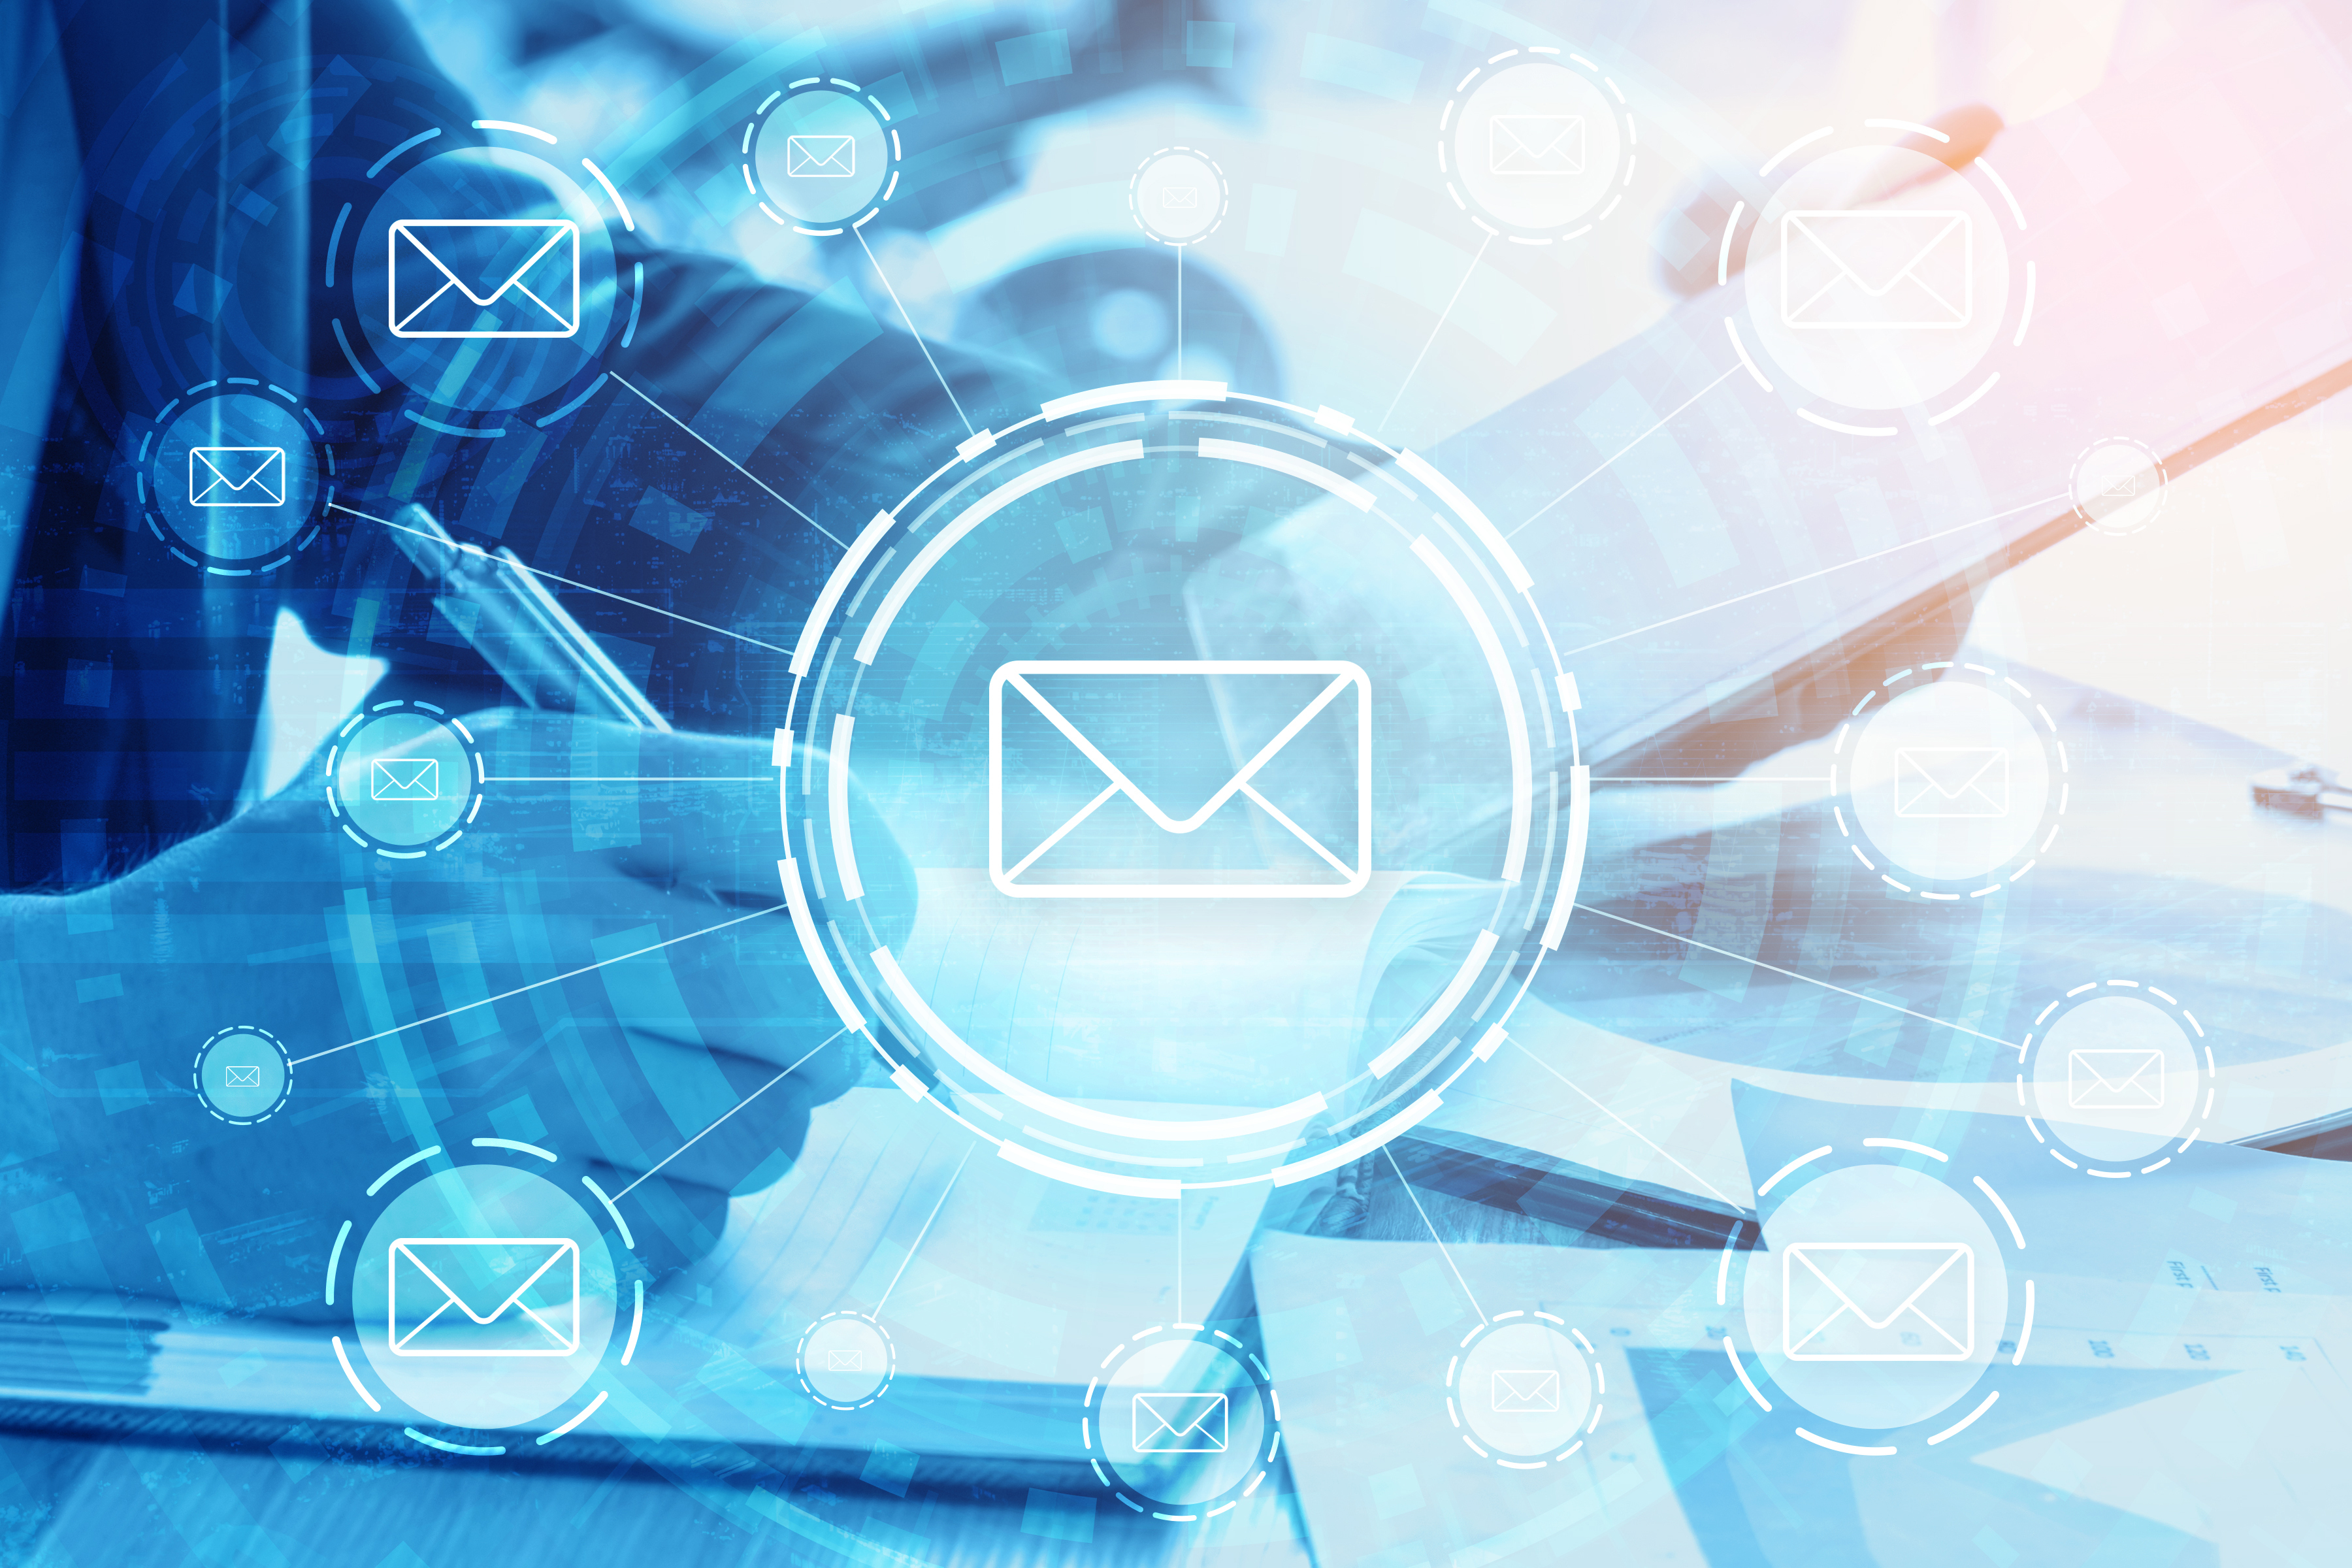 8 Common Types of Email Marketing You Should Know